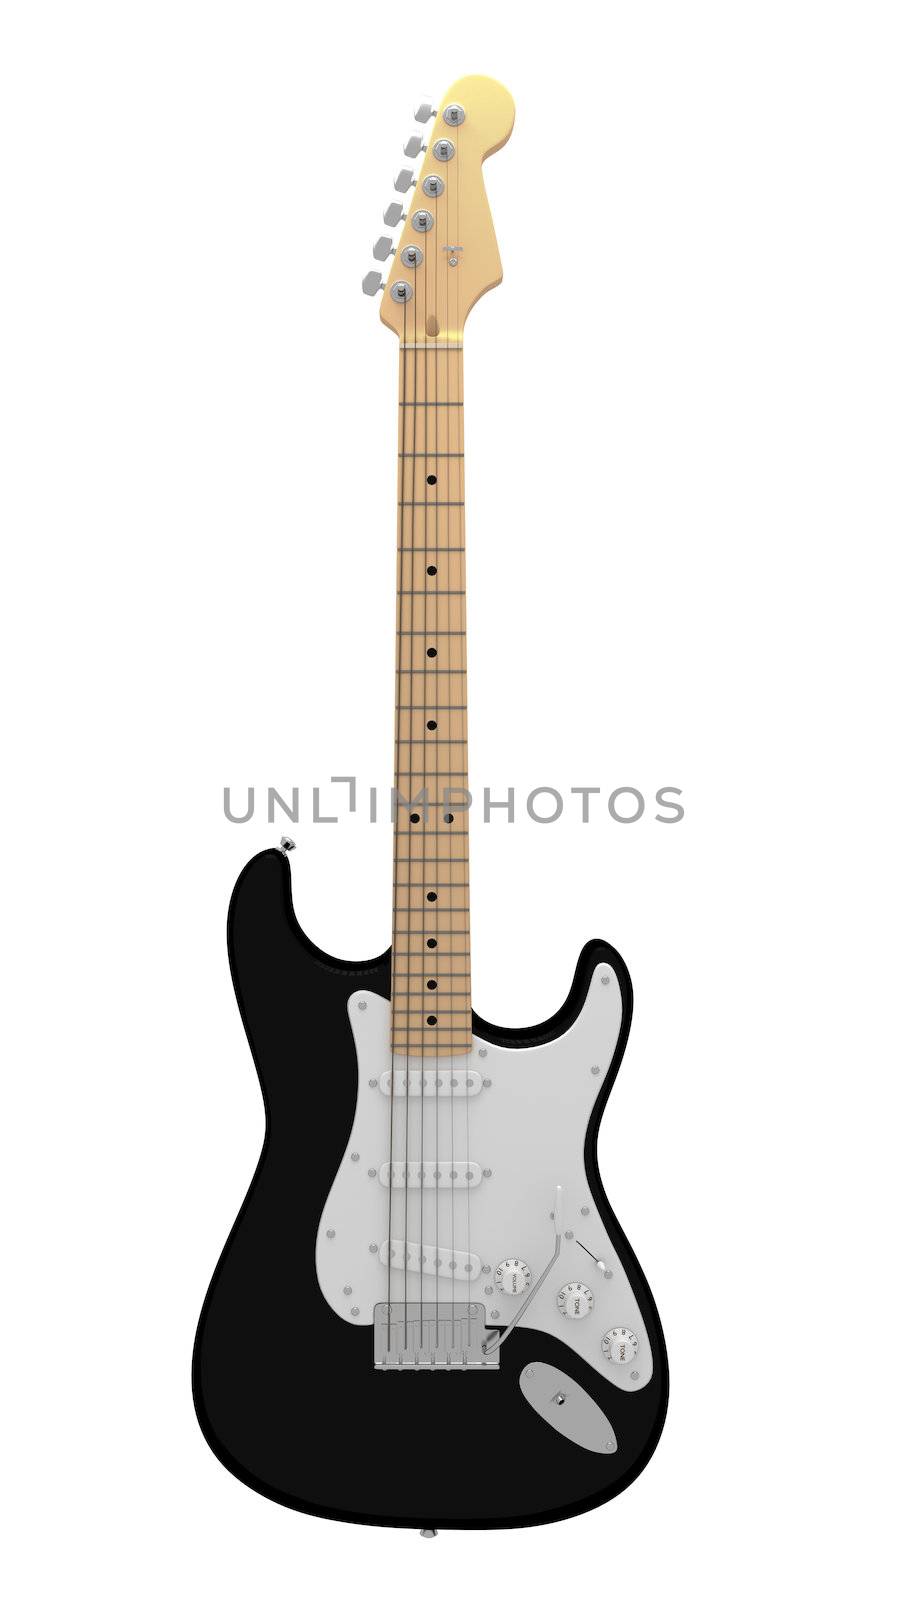 A CGI image of a black and white electric guitar on a white background.